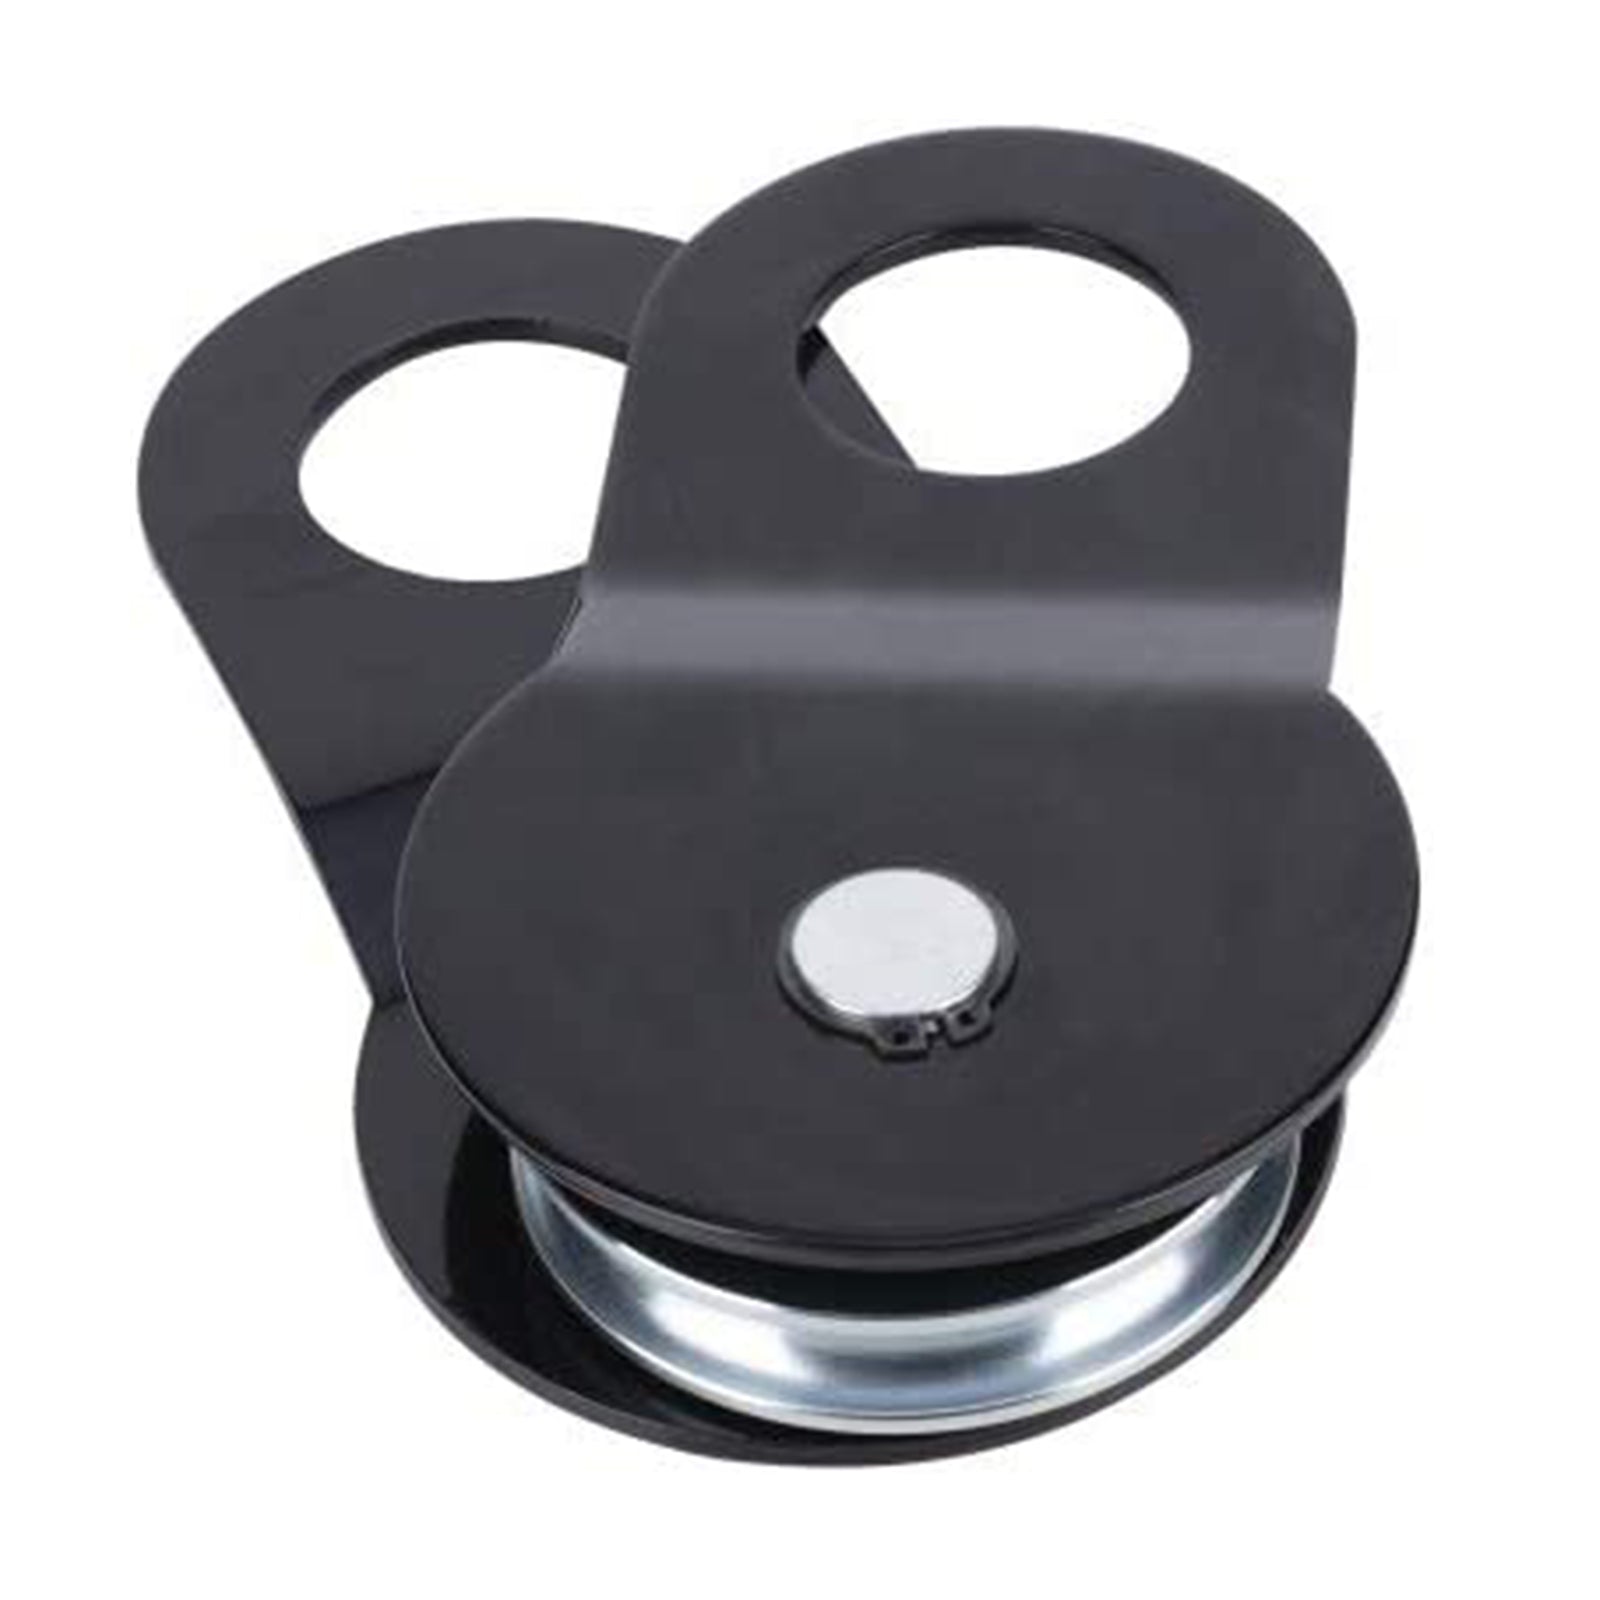 OPENROAD Heavy Duty 10 Ton Snatch Block Capacity Recovery Winch Pulley Block (20000LB)  openroad4wd.com   